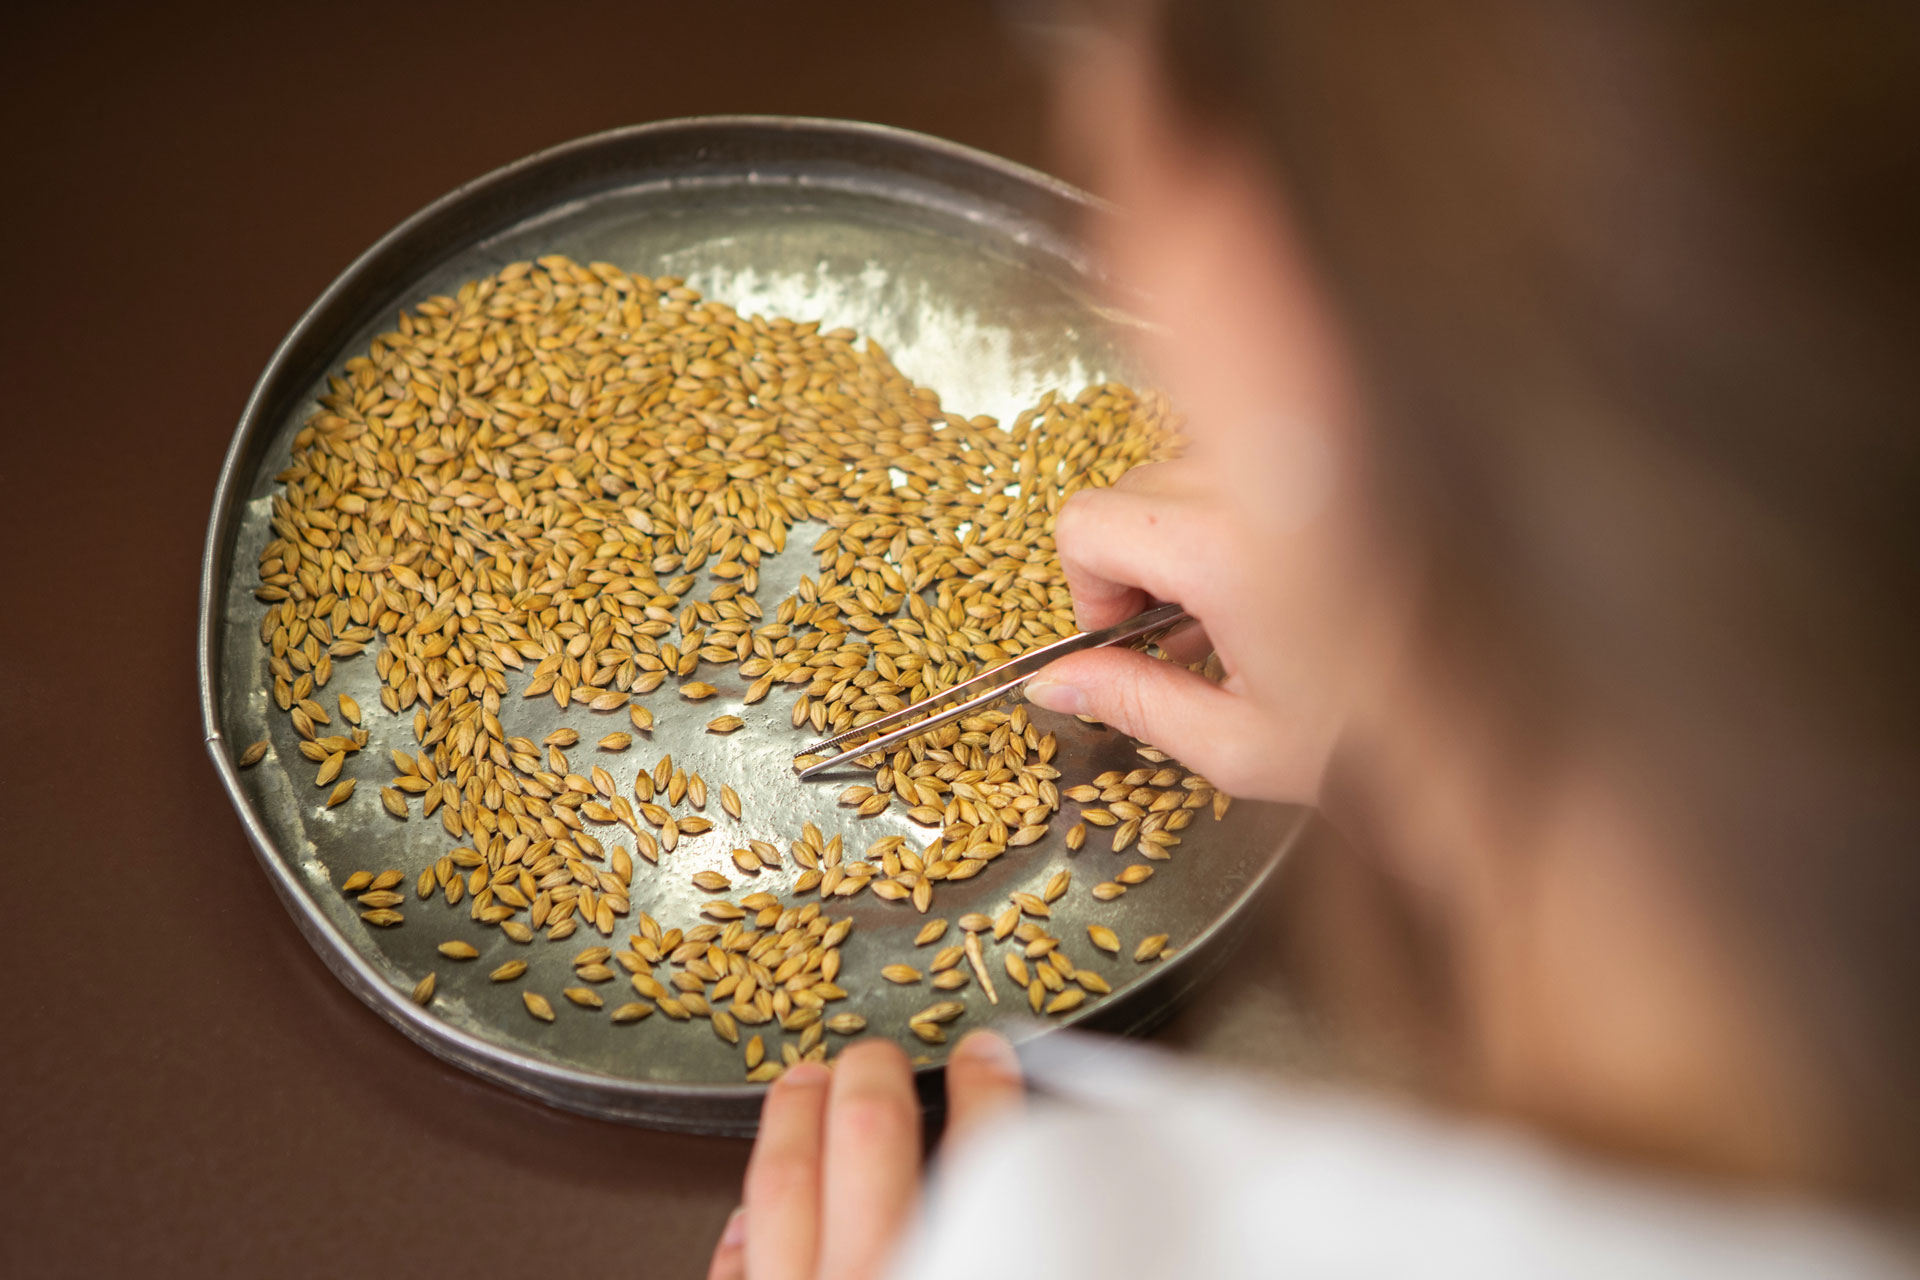 Kernels being examined with tweezers for damage or other abnormalities